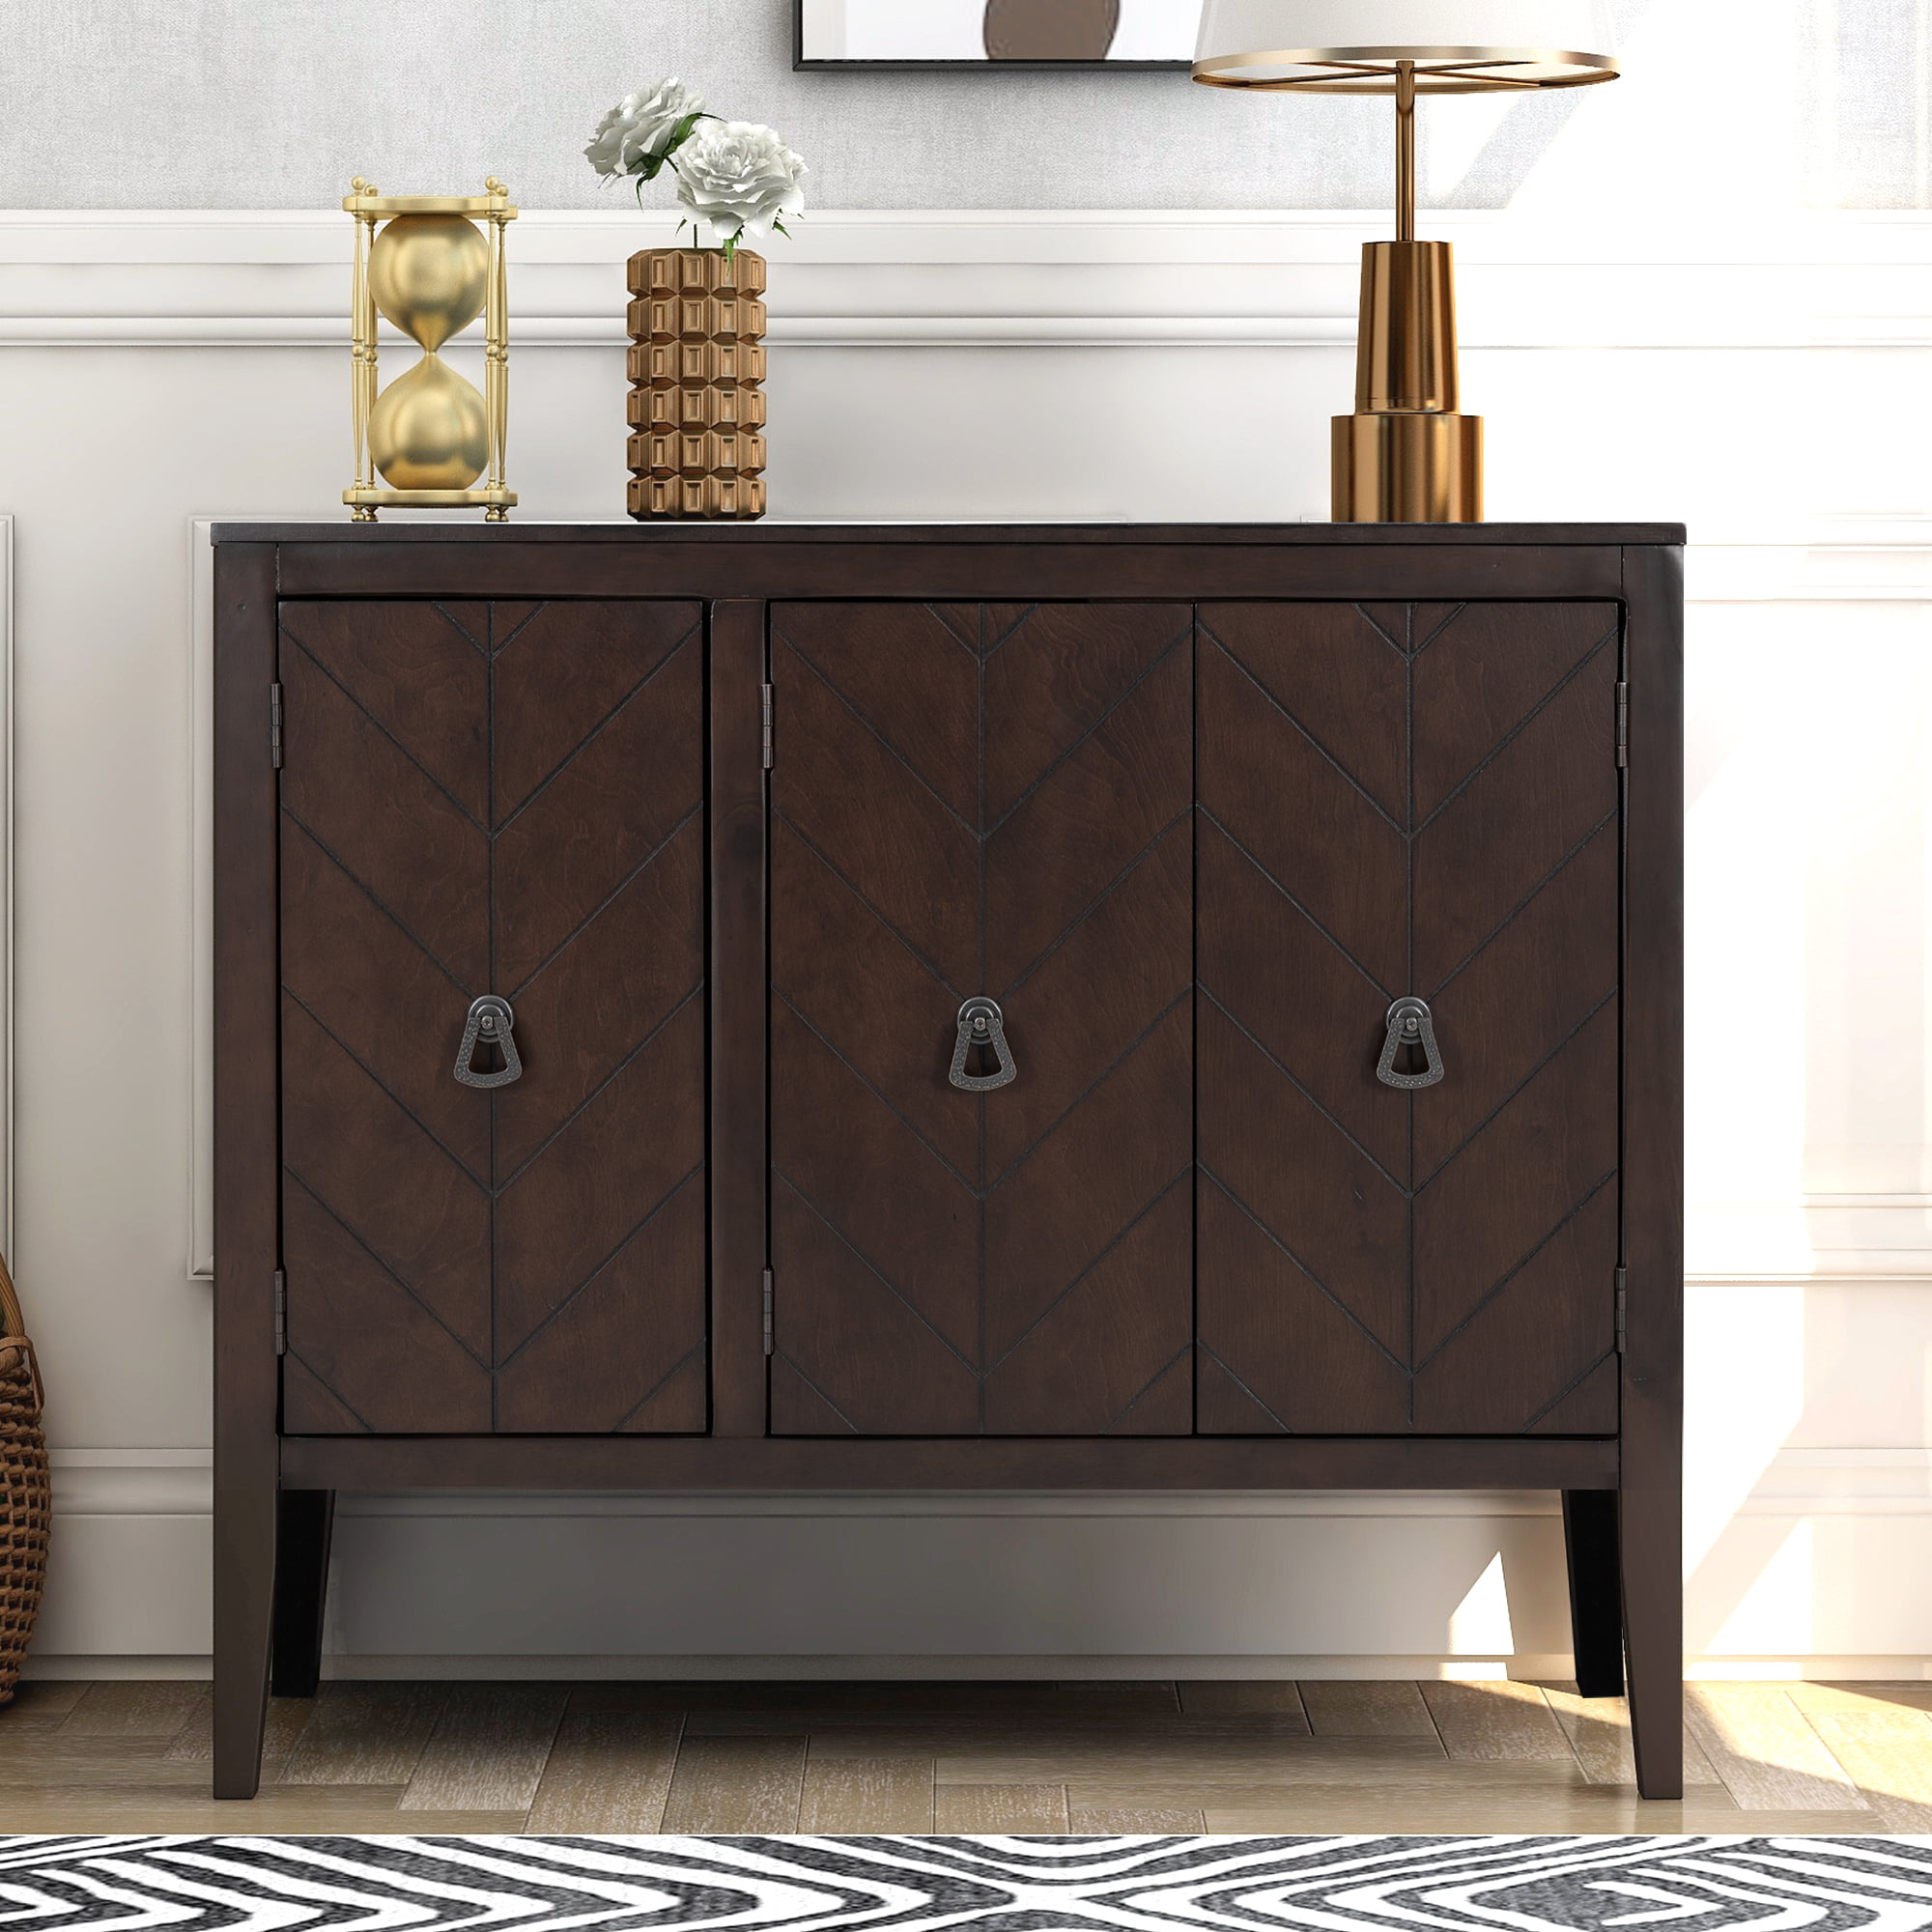 Sideboard Buffet Storage Cabinet, Solid Wood Accent Cabinets with 3